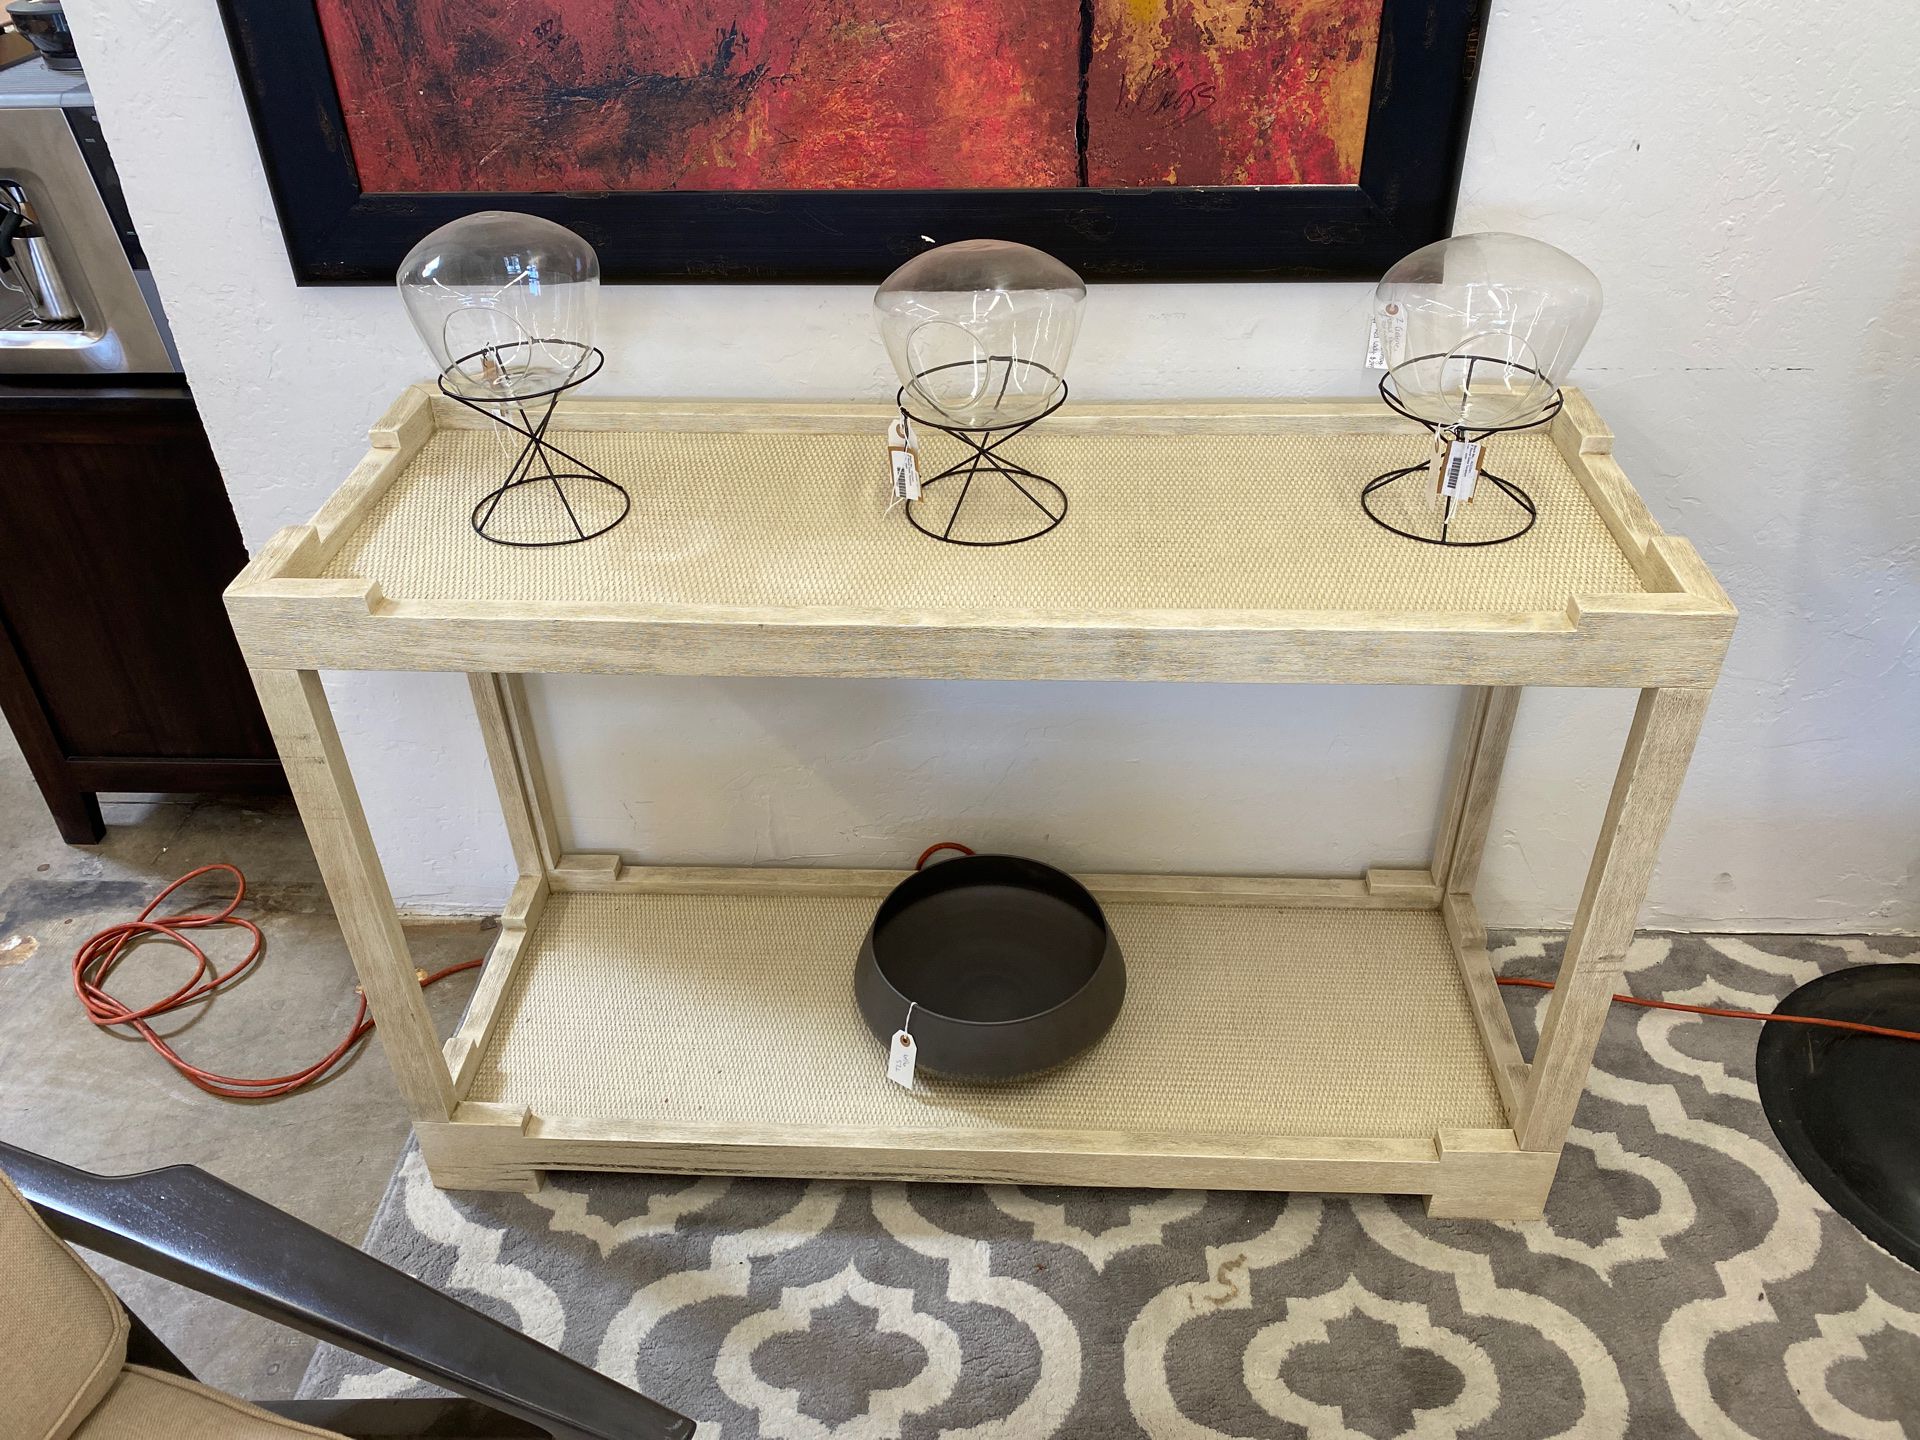 Came console table